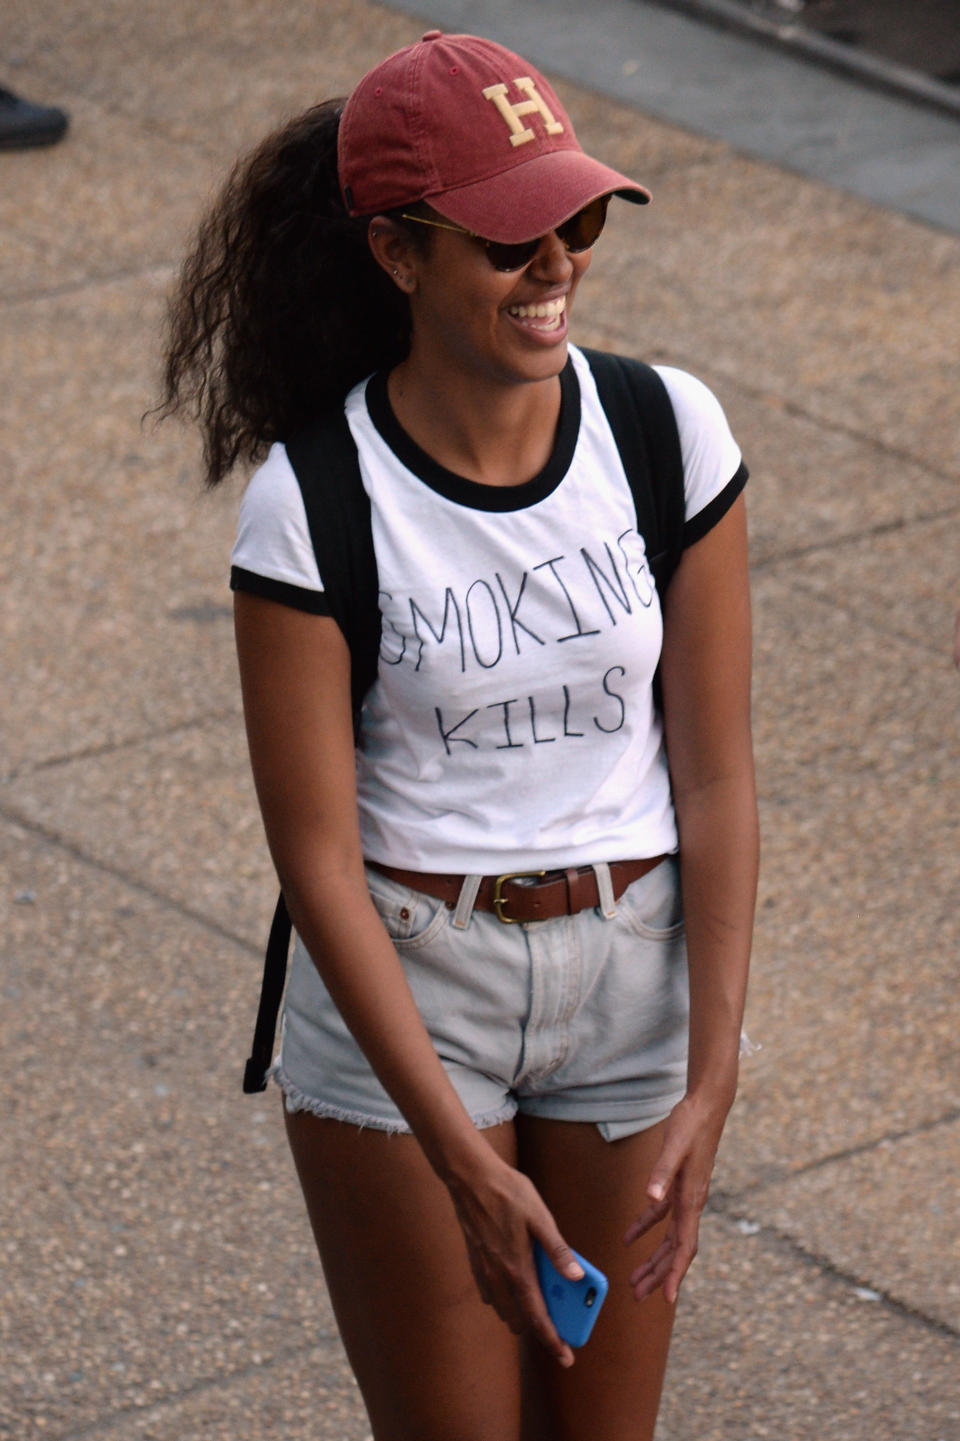 Despite receiving some <a href="http://www.huffingtonpost.com/evelyn-atieno/damn-can-we-let-malia-obama-live_b_11286818.html">brutal criticism</a>, Malia Obama lived her best life this year. The daughter of the leader of the free world got<a href="http://www.nytimes.com/2016/05/02/us/politics/malia-obama-to-attend-harvard-but-not-until-2017.html?_r=0" target="_blank"> accepted to Harvard University</a> earlier this year and <a href="https://www.youtube.com/watch?v=jugMCzm9NuI" target="_blank">partied&nbsp;at festivals</a> like she didn't have a care in the world. Despite the <a href="http://www.huffingtonpost.com/evelyn-atieno/damn-can-we-let-malia-obama-live_b_11286818.html">cruel and racist language </a>many people have spewed at her, Malia showed the world exactly what a the black teenager of the president should be: a teenager.